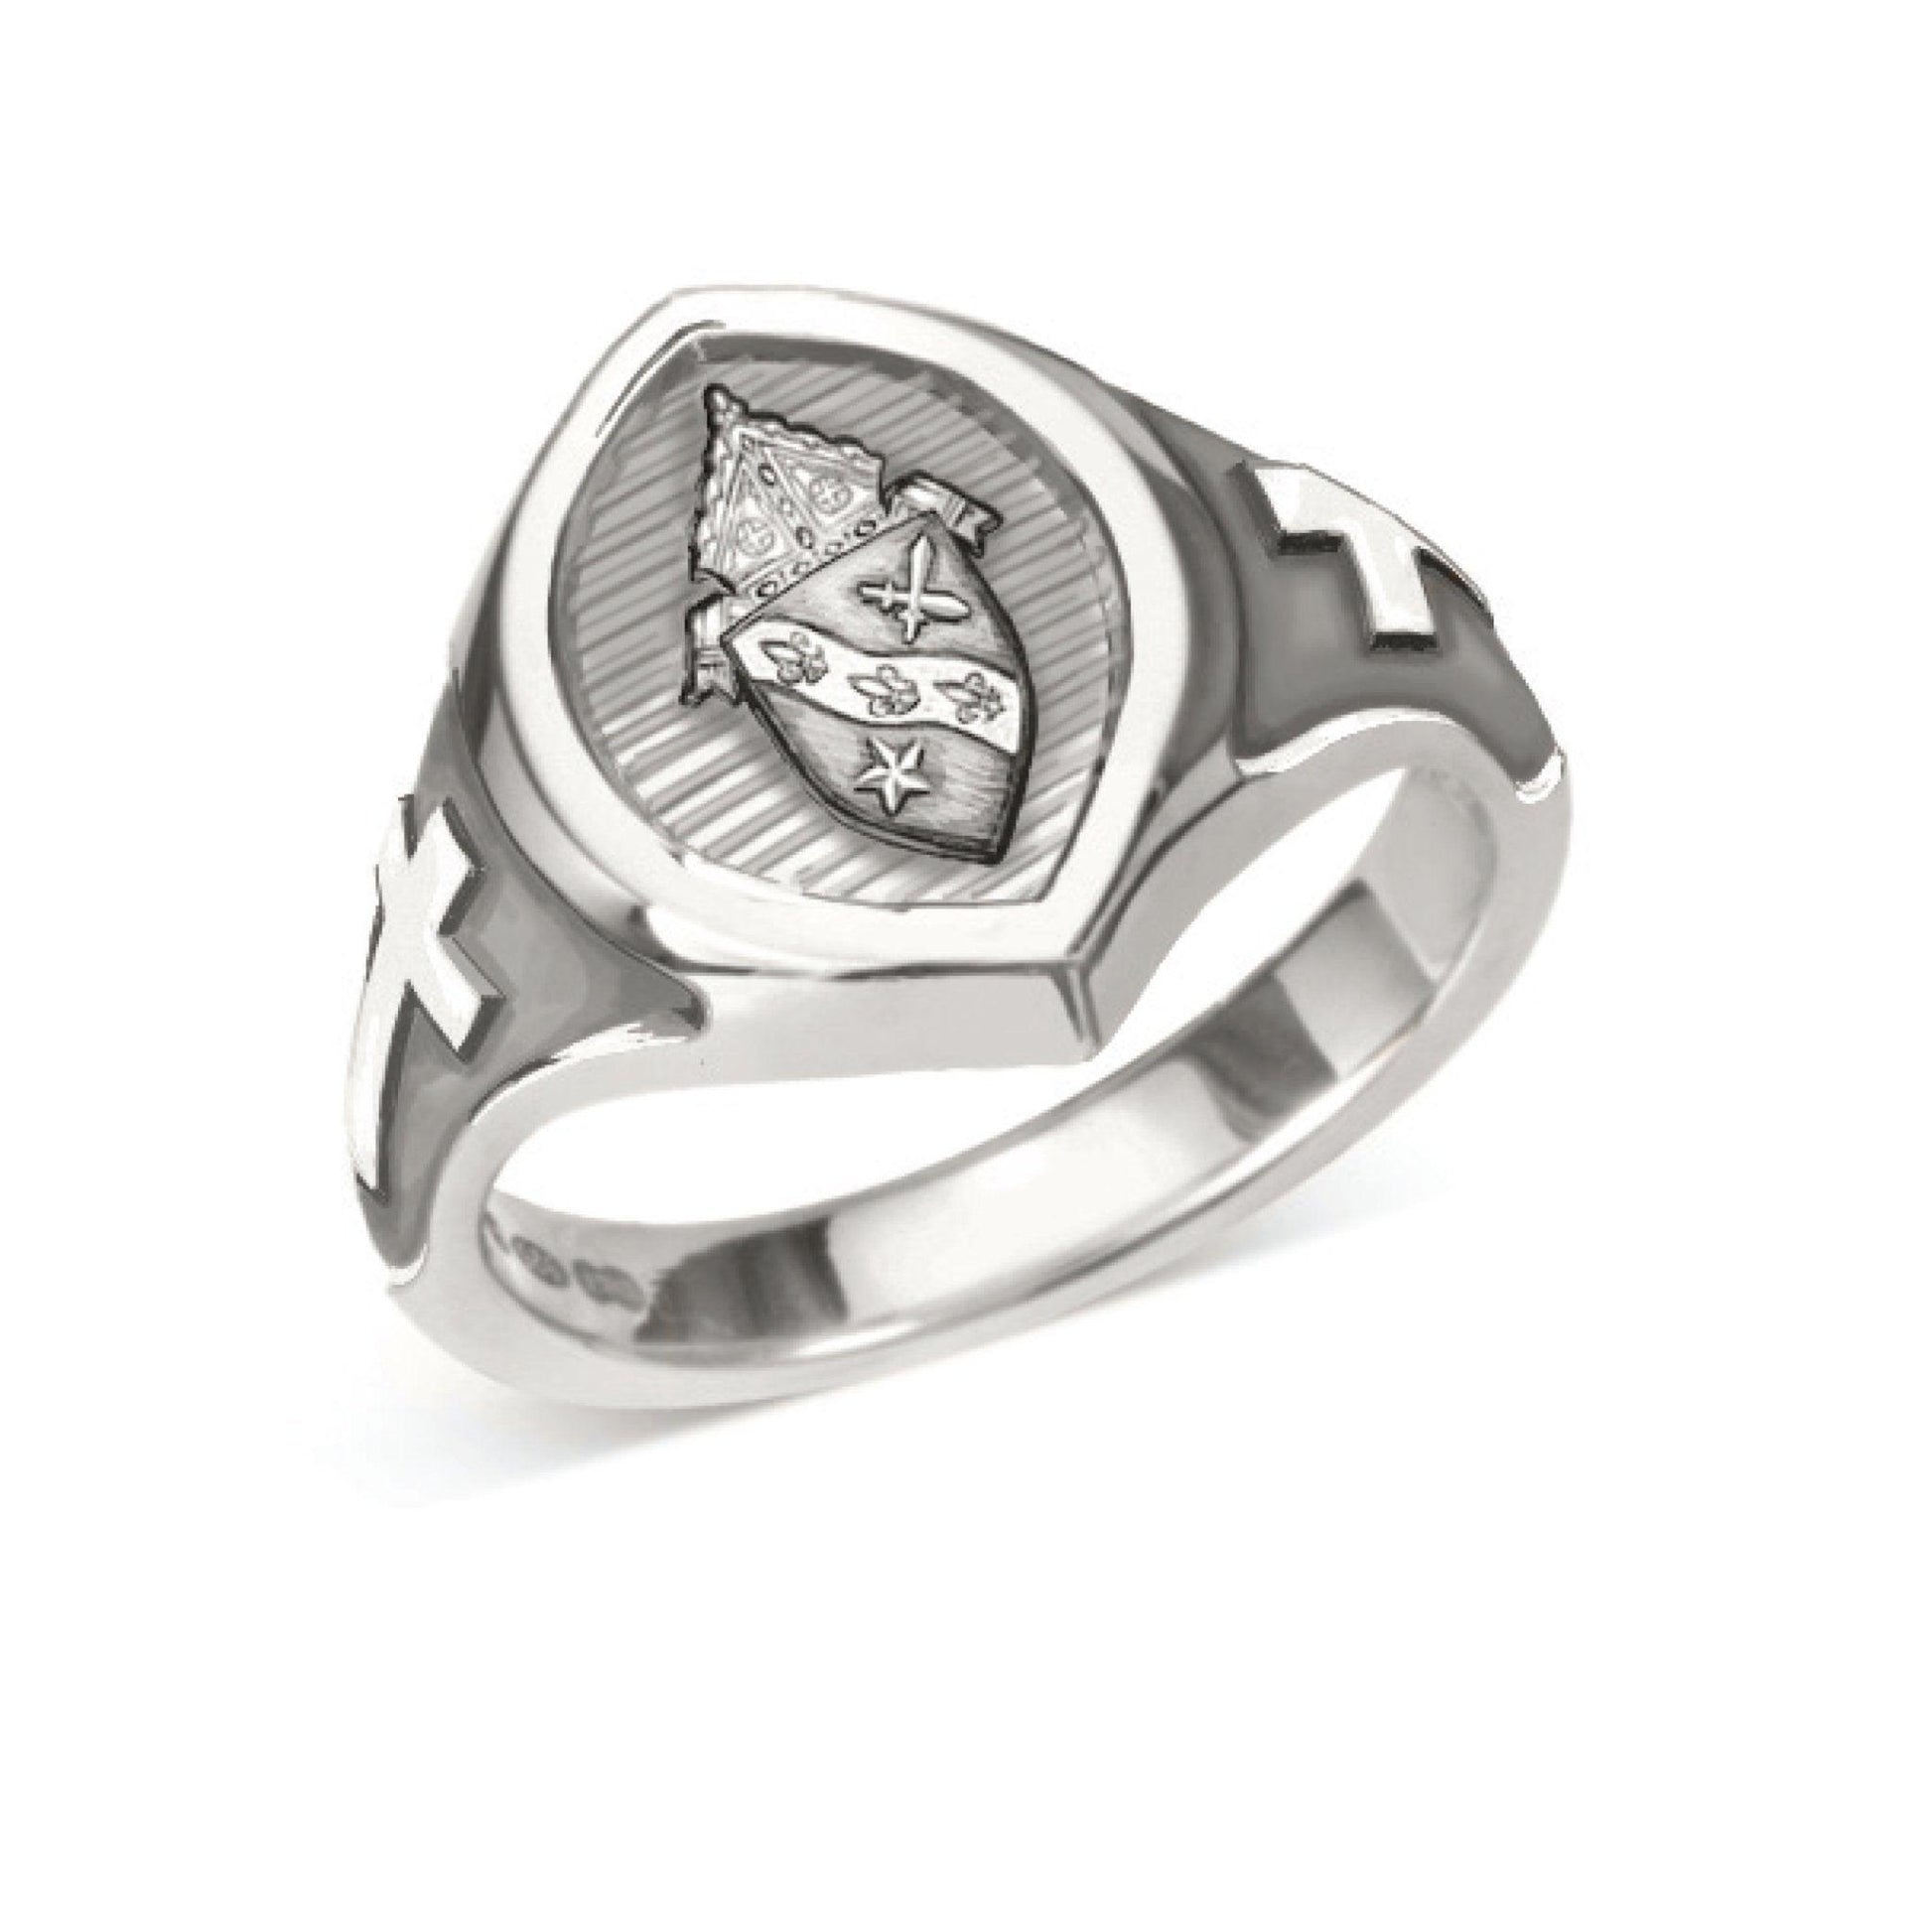 Sterling Silver Custom Engraved Bishop Ring with Crosses - Watts & Co.